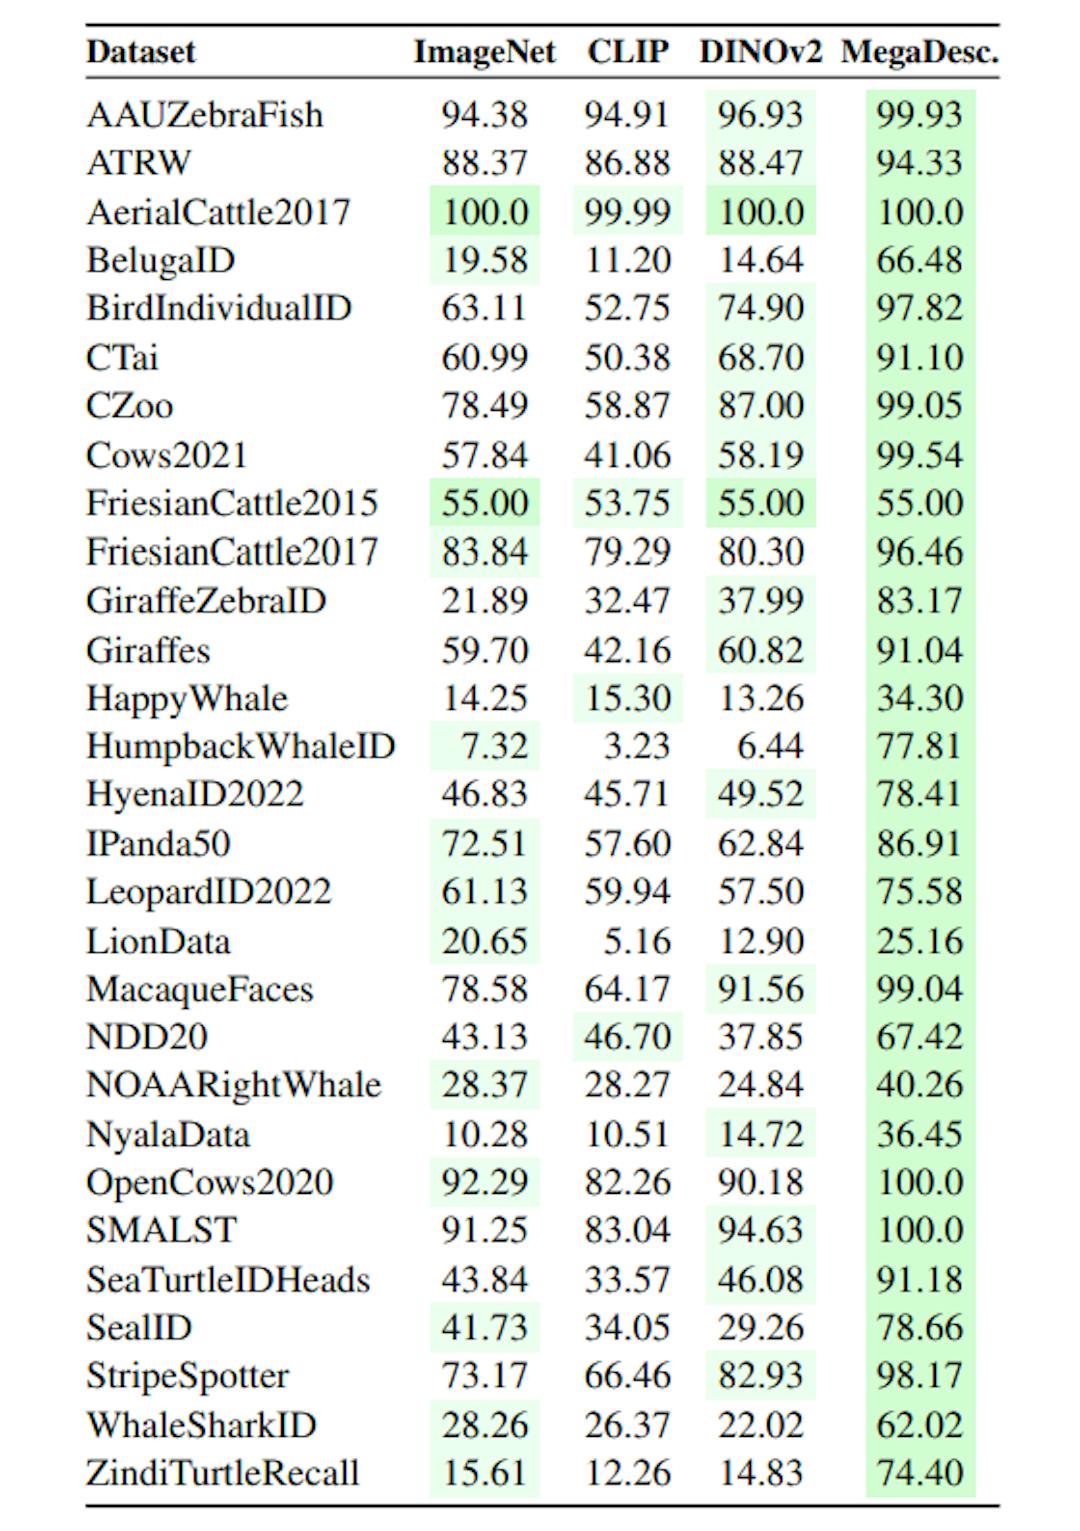 Table 4. Animal re-identification performance. We compare the MegaDescriptor-L (Swin-L/p4-w12-384) among available pretrained models, e.g., ImageNet-1k (Swin-B/p4-w7-224), CLIP (ViT-L/p14-336), and DINOv2 (ViT-L/p14-518). The proposed MegaDescriptor-L provides consistent performance on all datasets and outperforms all methods on all 29 datasets.